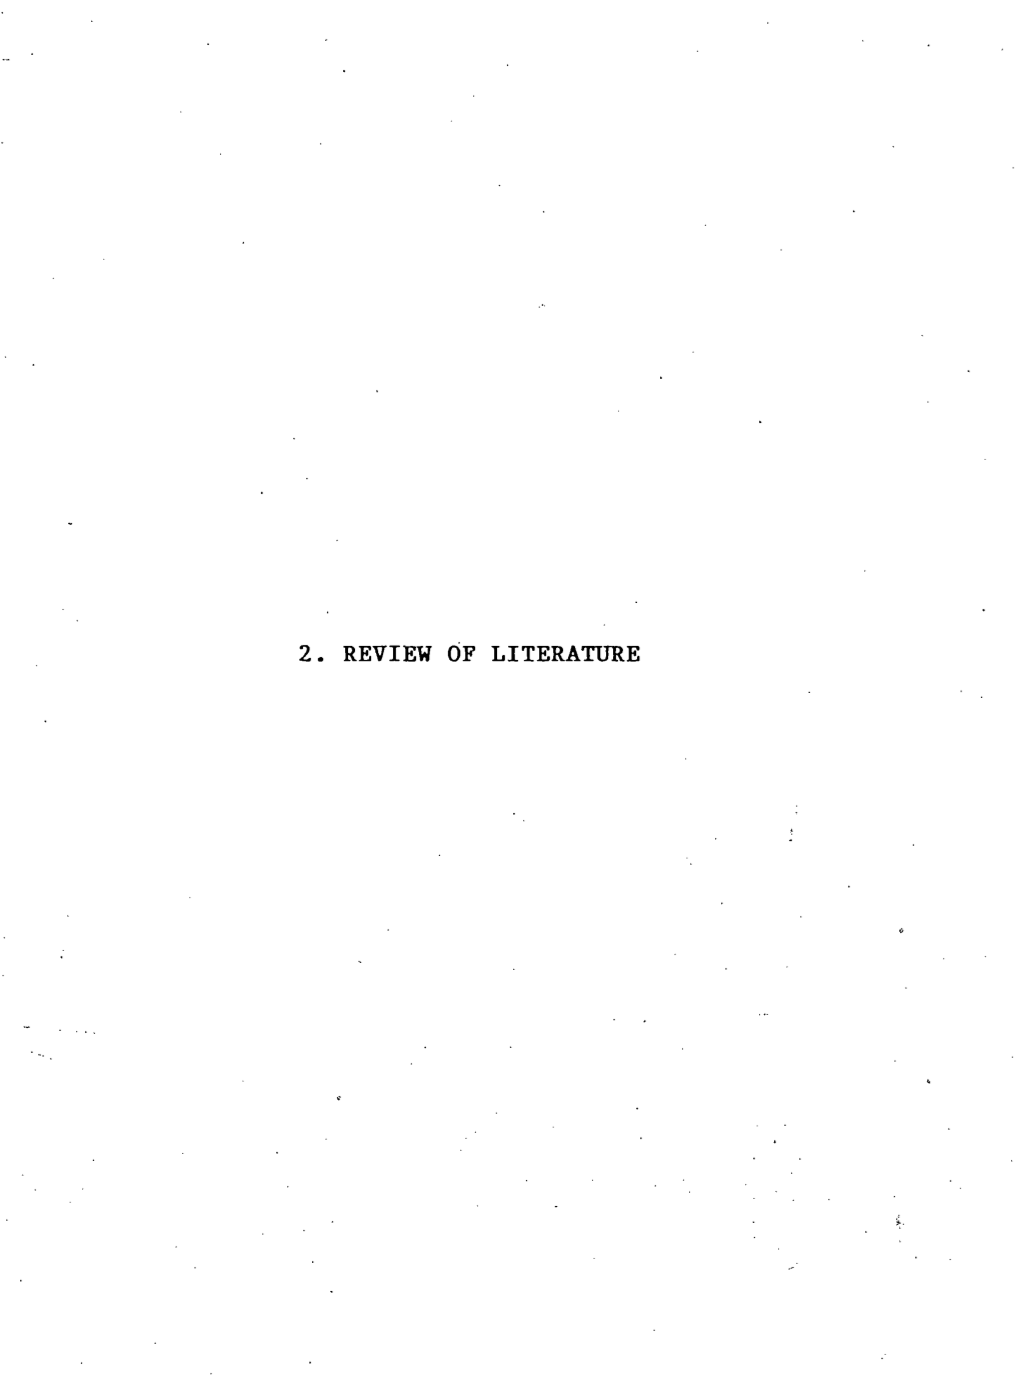 2. Review of Literature